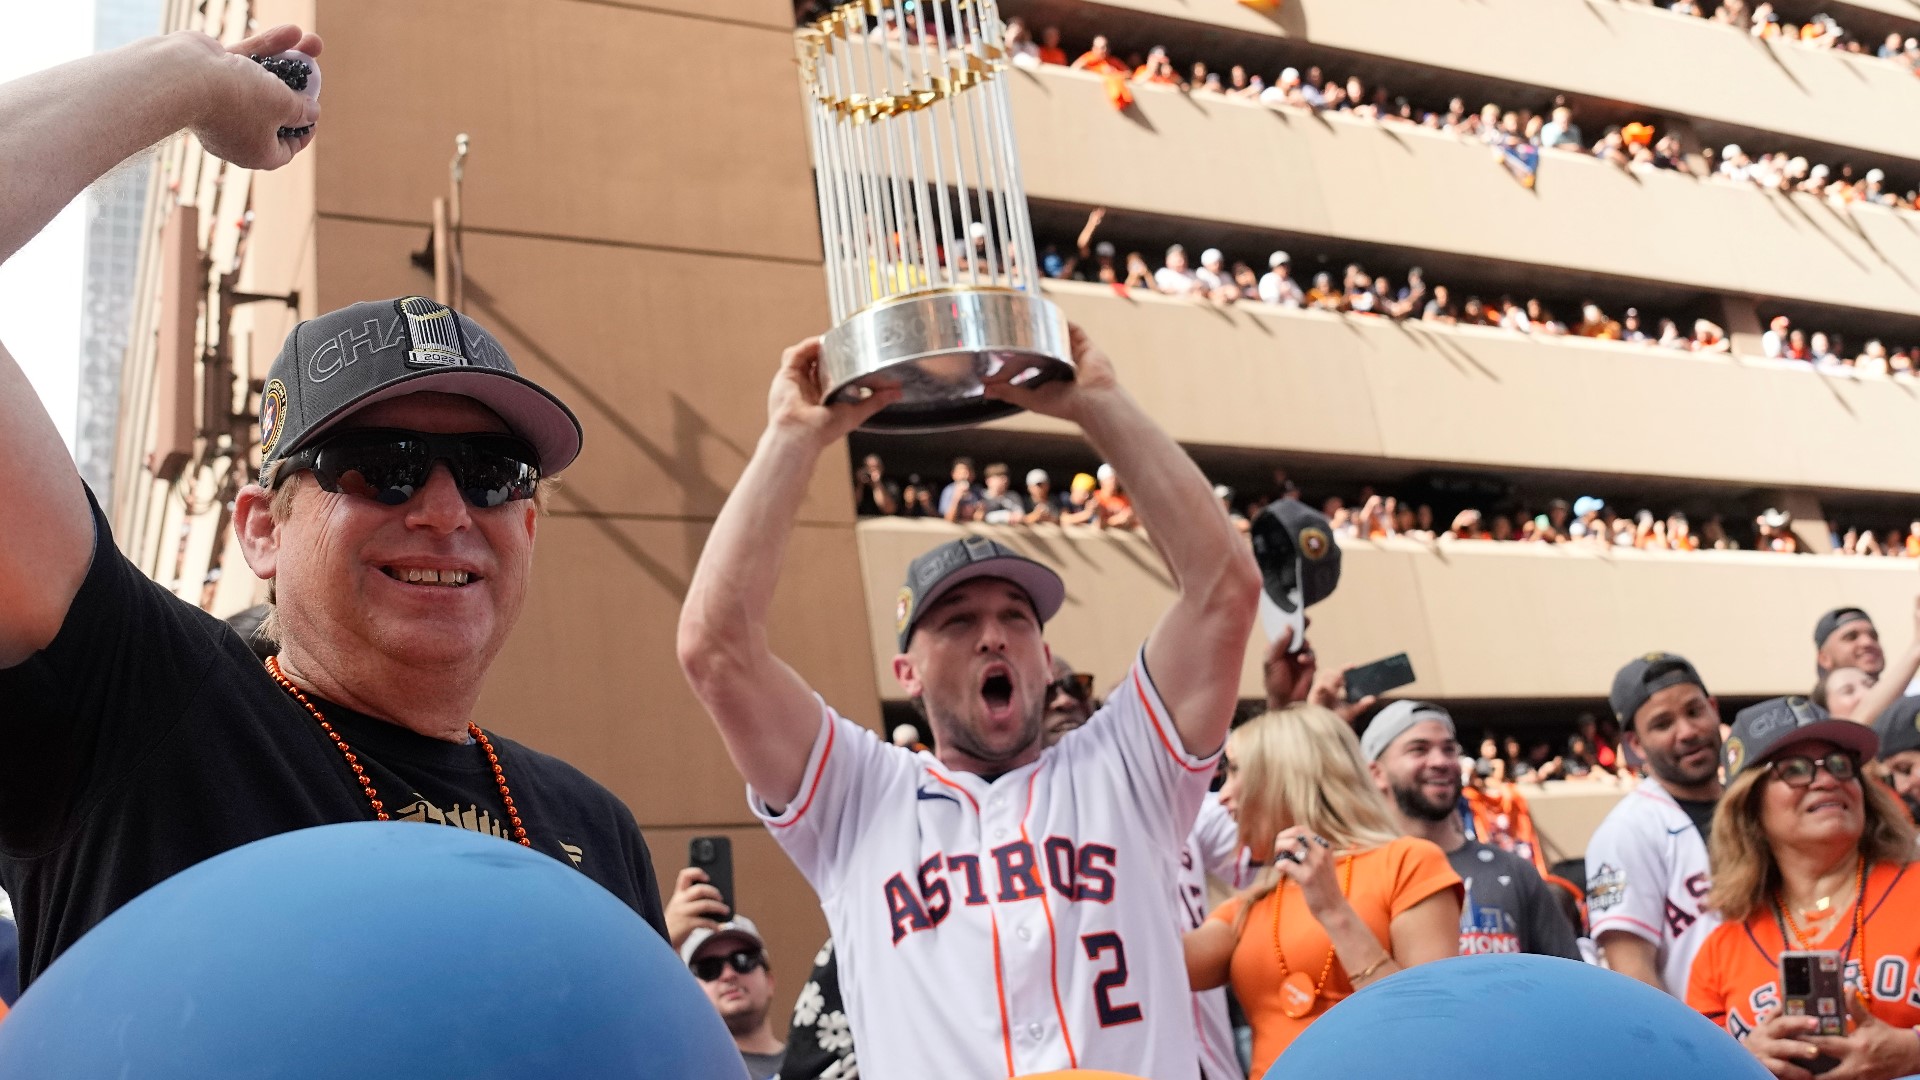 It was a day of celebration for the Houston Astros and their fans following their World Series win over Philadelphia.